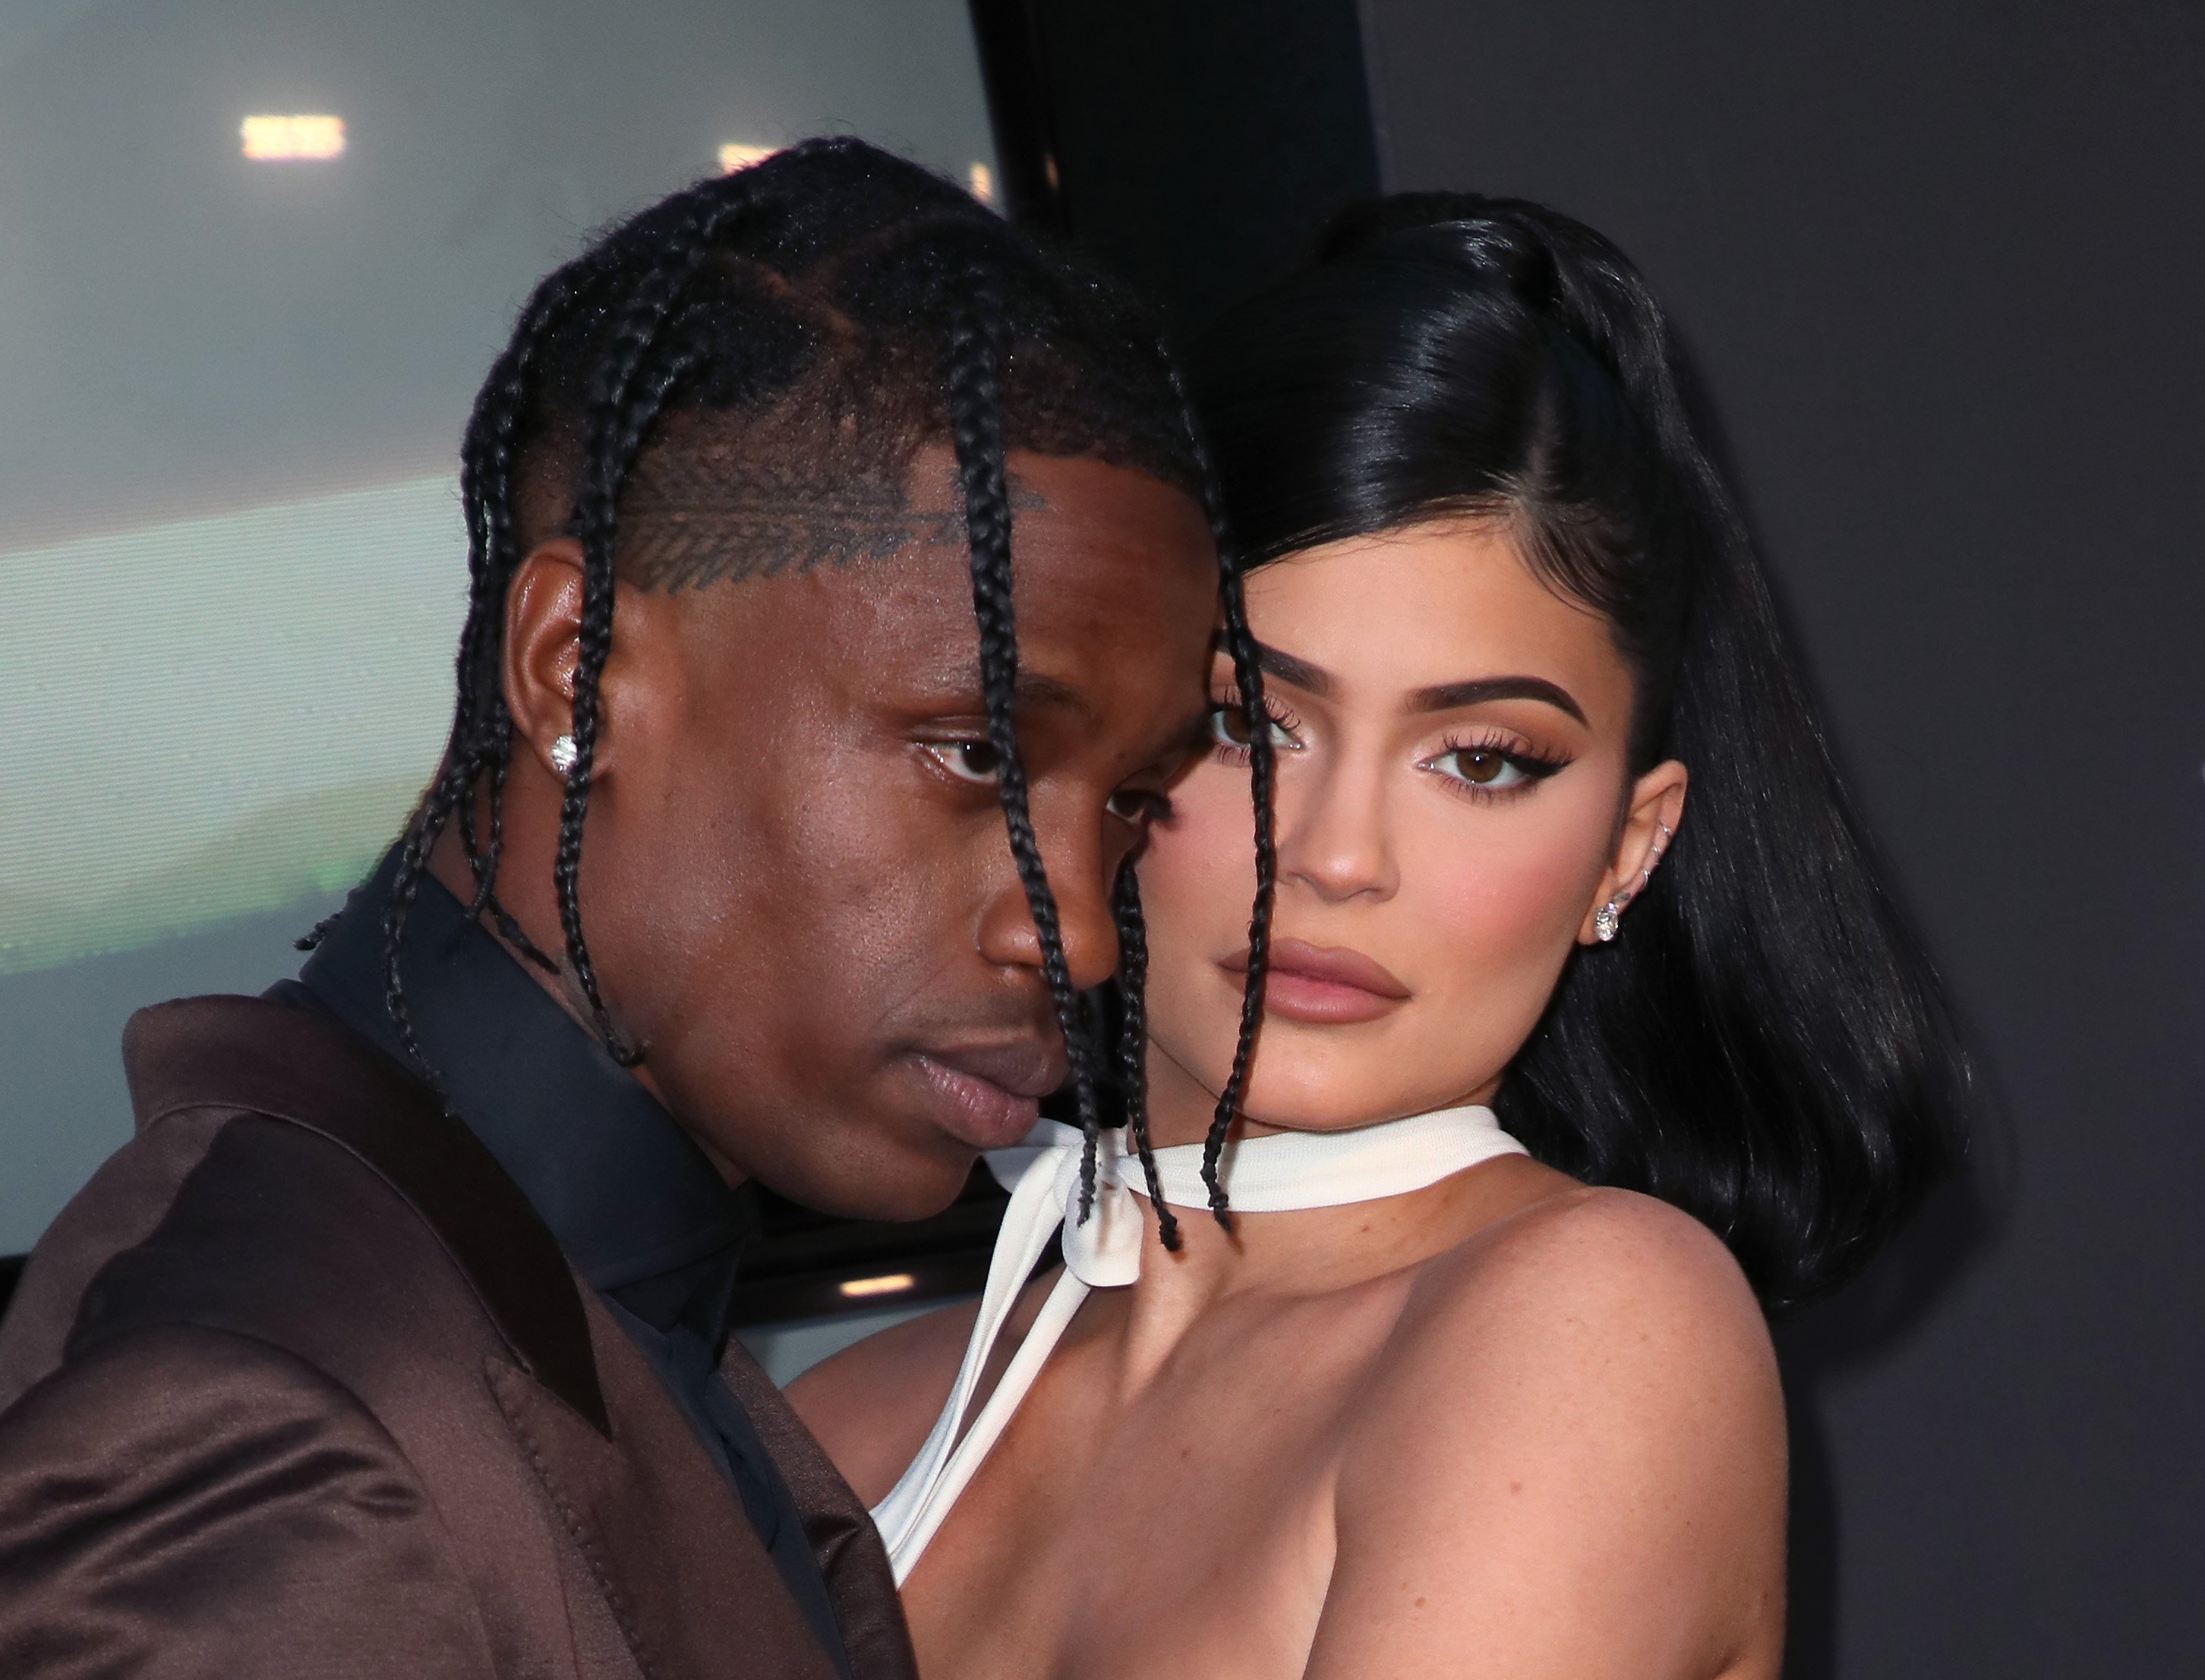 Travis Scott and Kylie Jenner pose close together at the premiere of Netflix documentary about the rapper